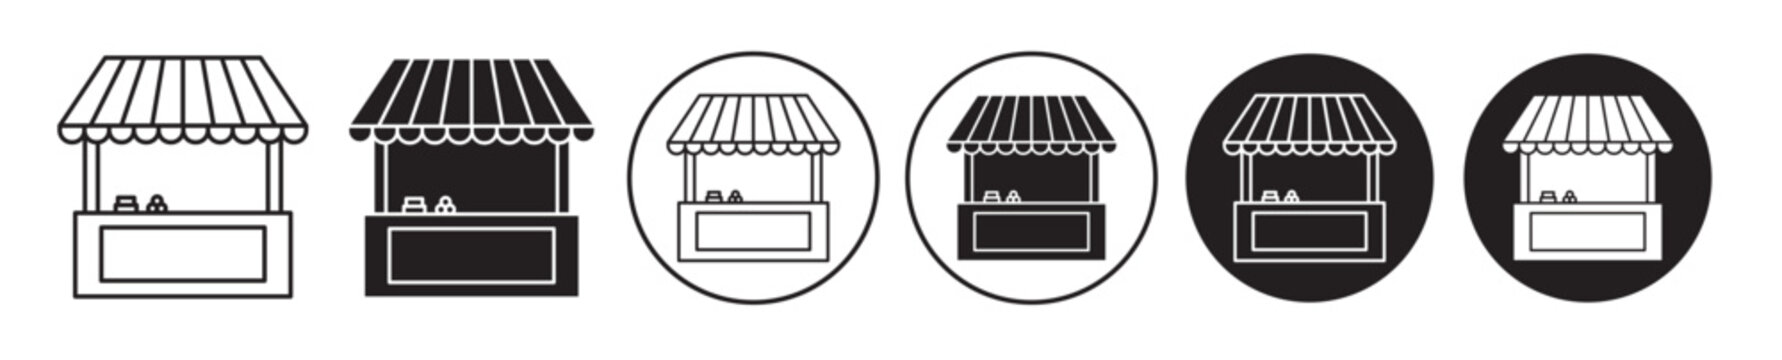 Local stall icon set. street market food stand line vector symbol. oneline marketplace sign. simple local store or shop in black filled and outlined style. suitable for mobile app, and website UI